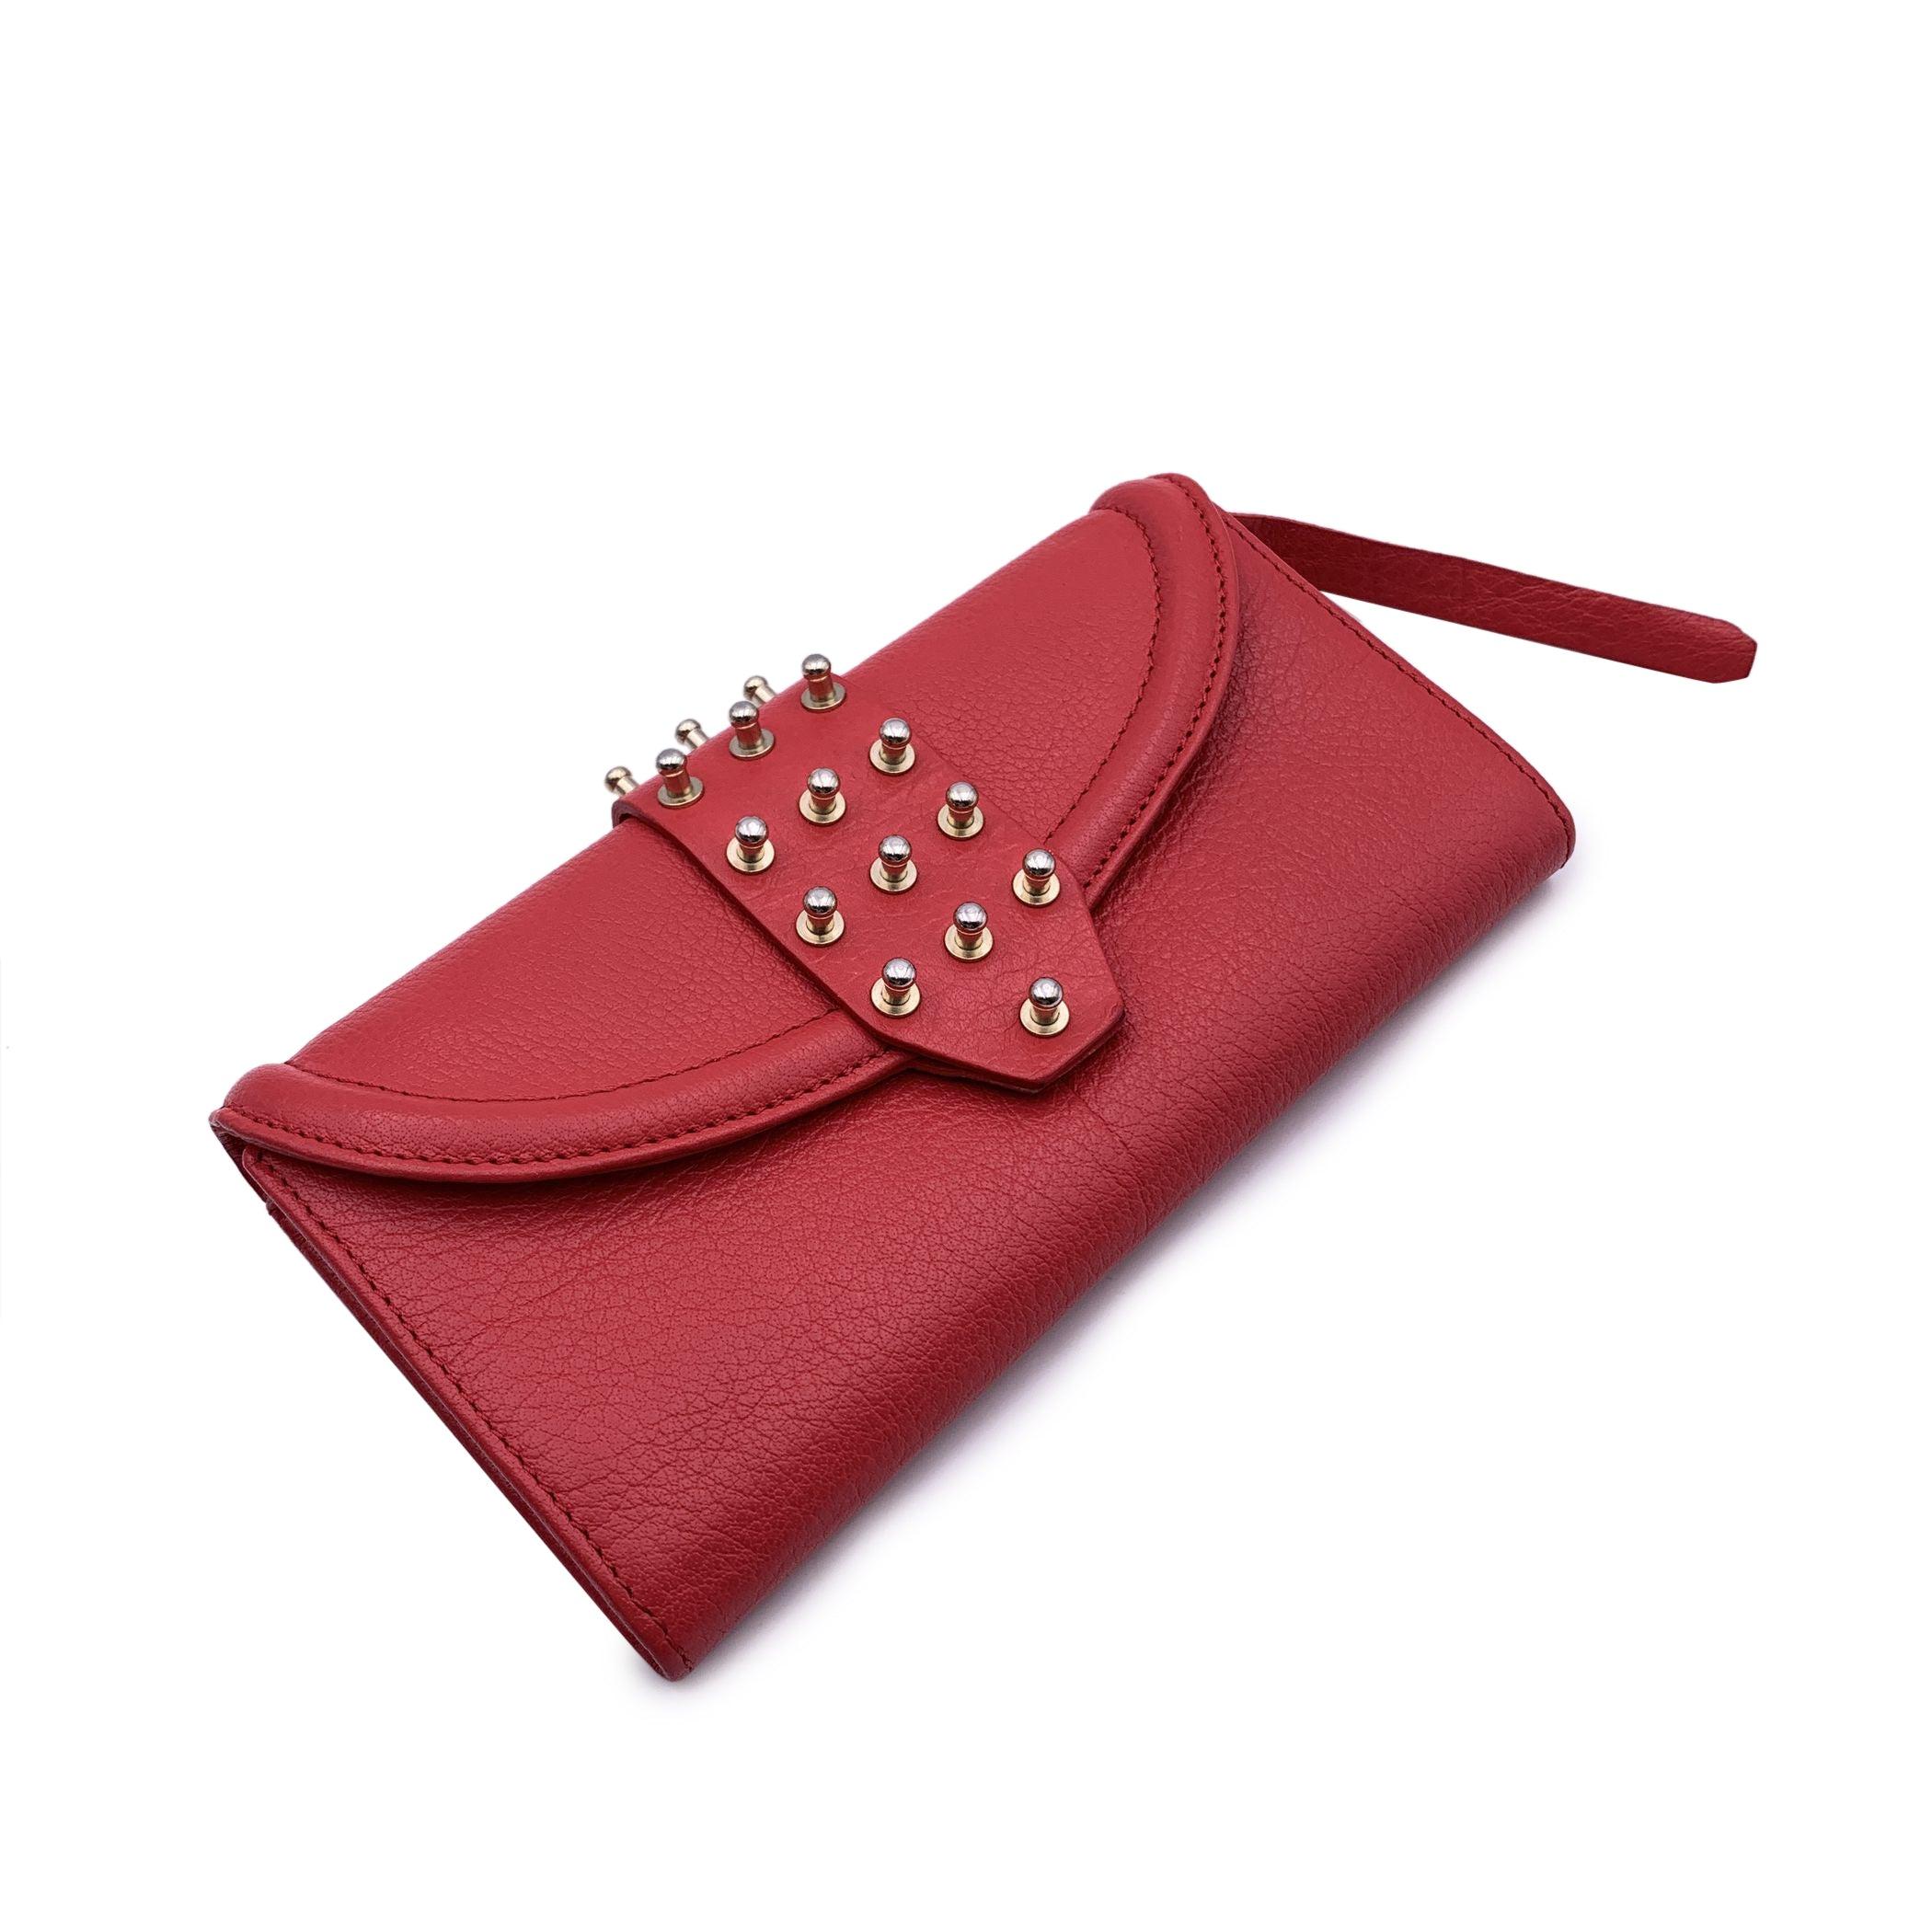 McQ Alexander McQueen Red Leather Studded Continental Wallet. Flap with button closure. Light gold studs on the flap. Fabric lining. 2 main compartments for bills inside. 1 zip compartment for coins. 2 flat open pockets, 8 credit card slots. Details